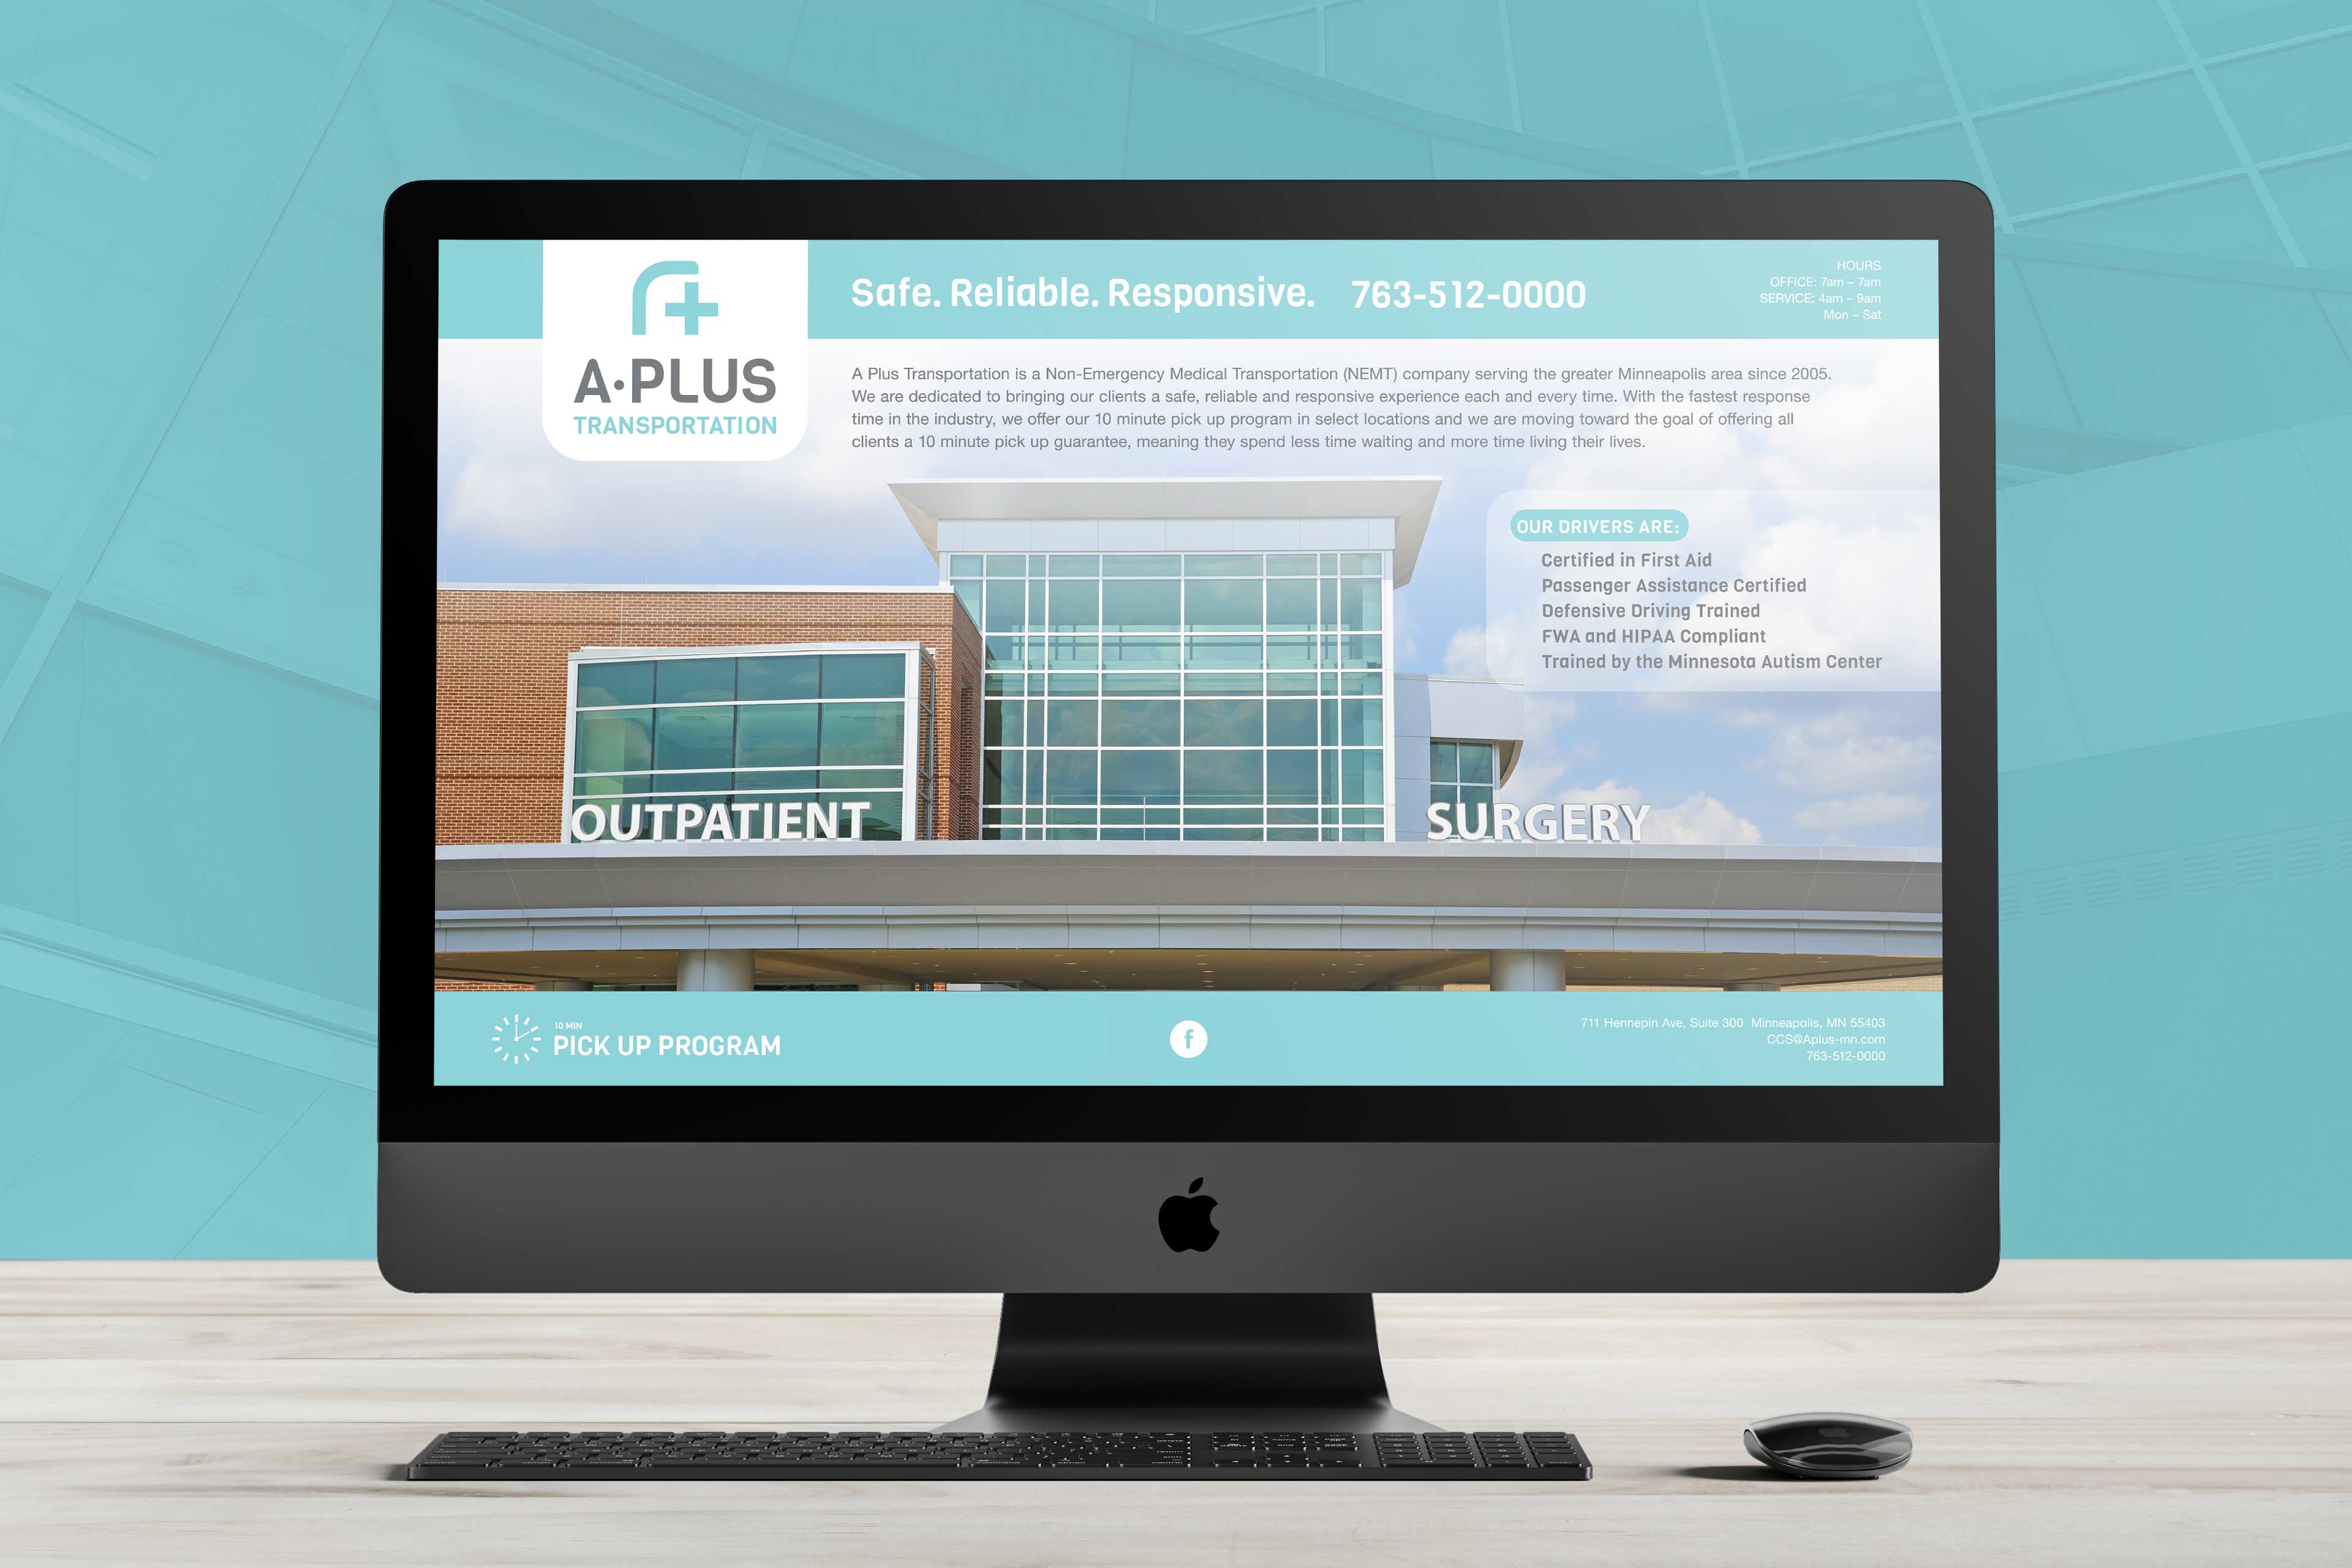 We designed a landing page for the A-Plus website that clearly introduces the new brand.